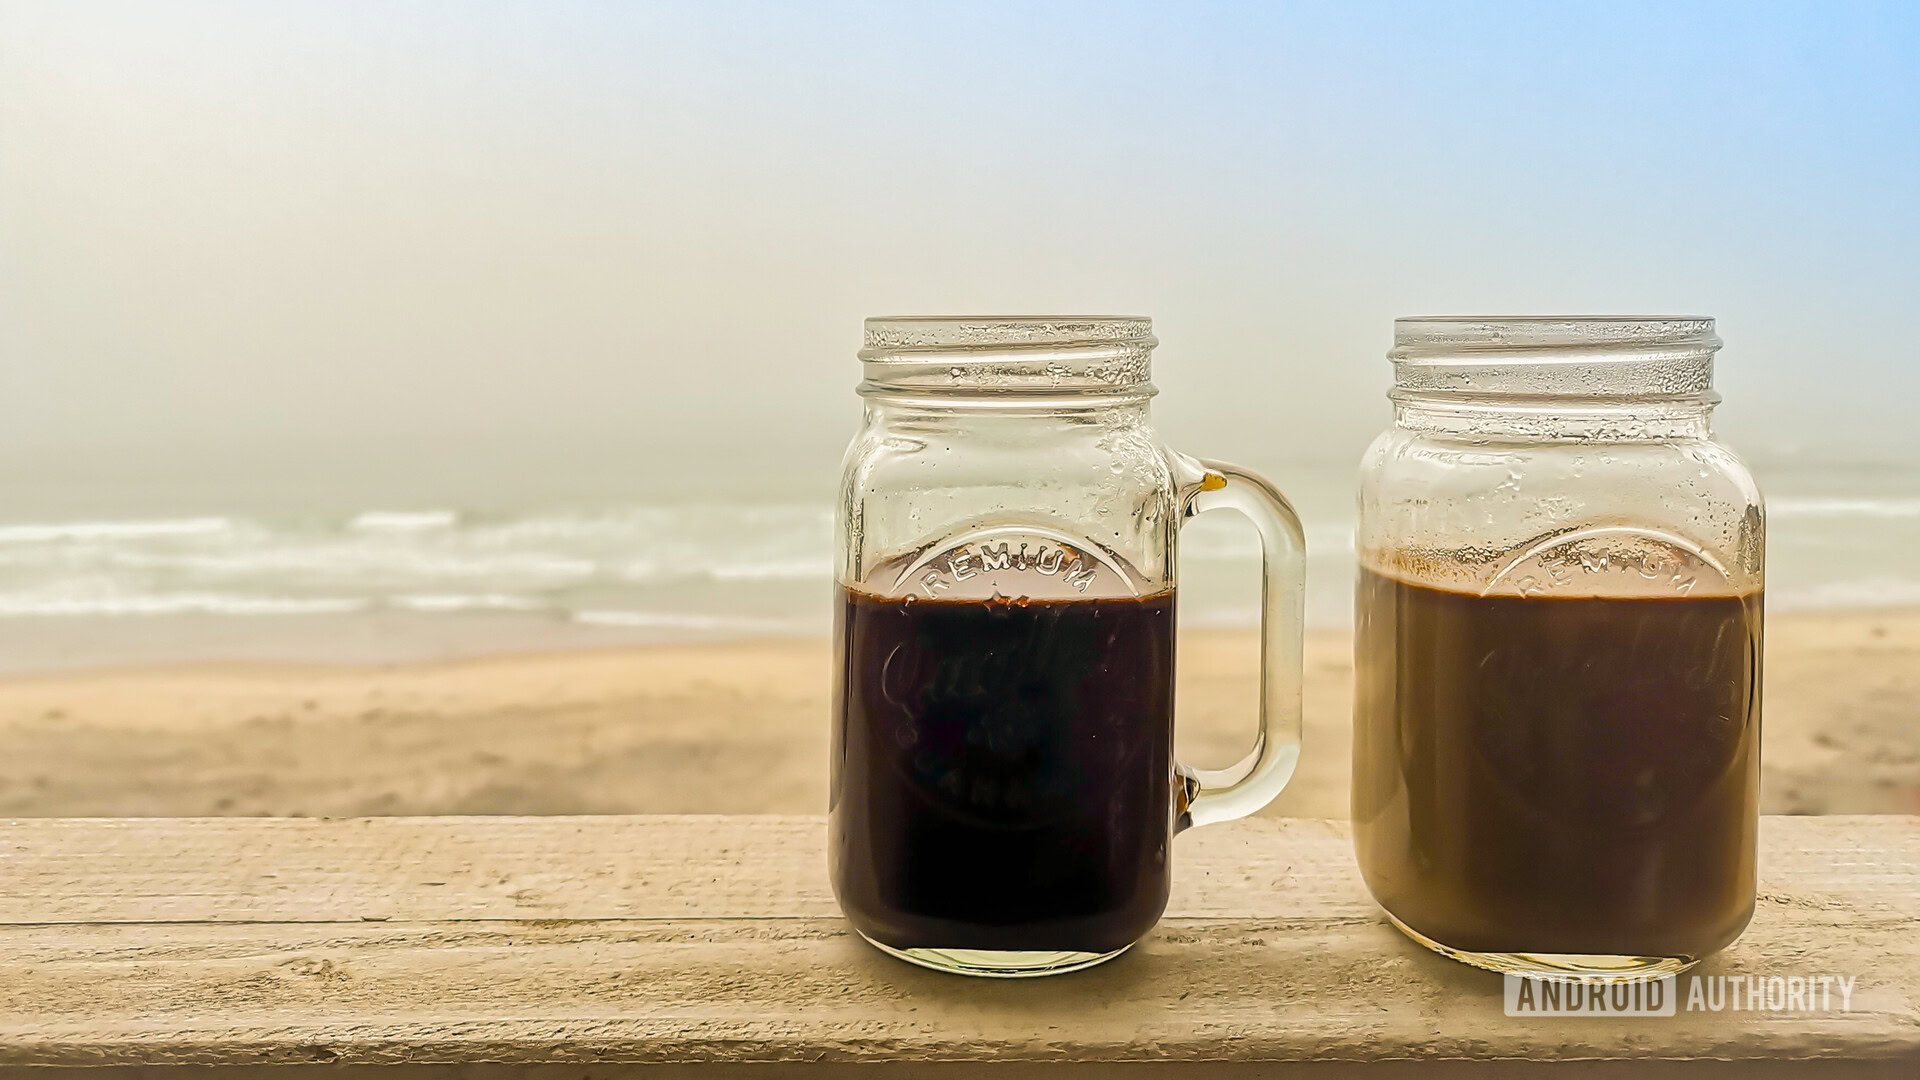 https://www.androidauthority.com/wp-content/uploads/2019/09/Coffee-mugs-by-the-beach.jpg